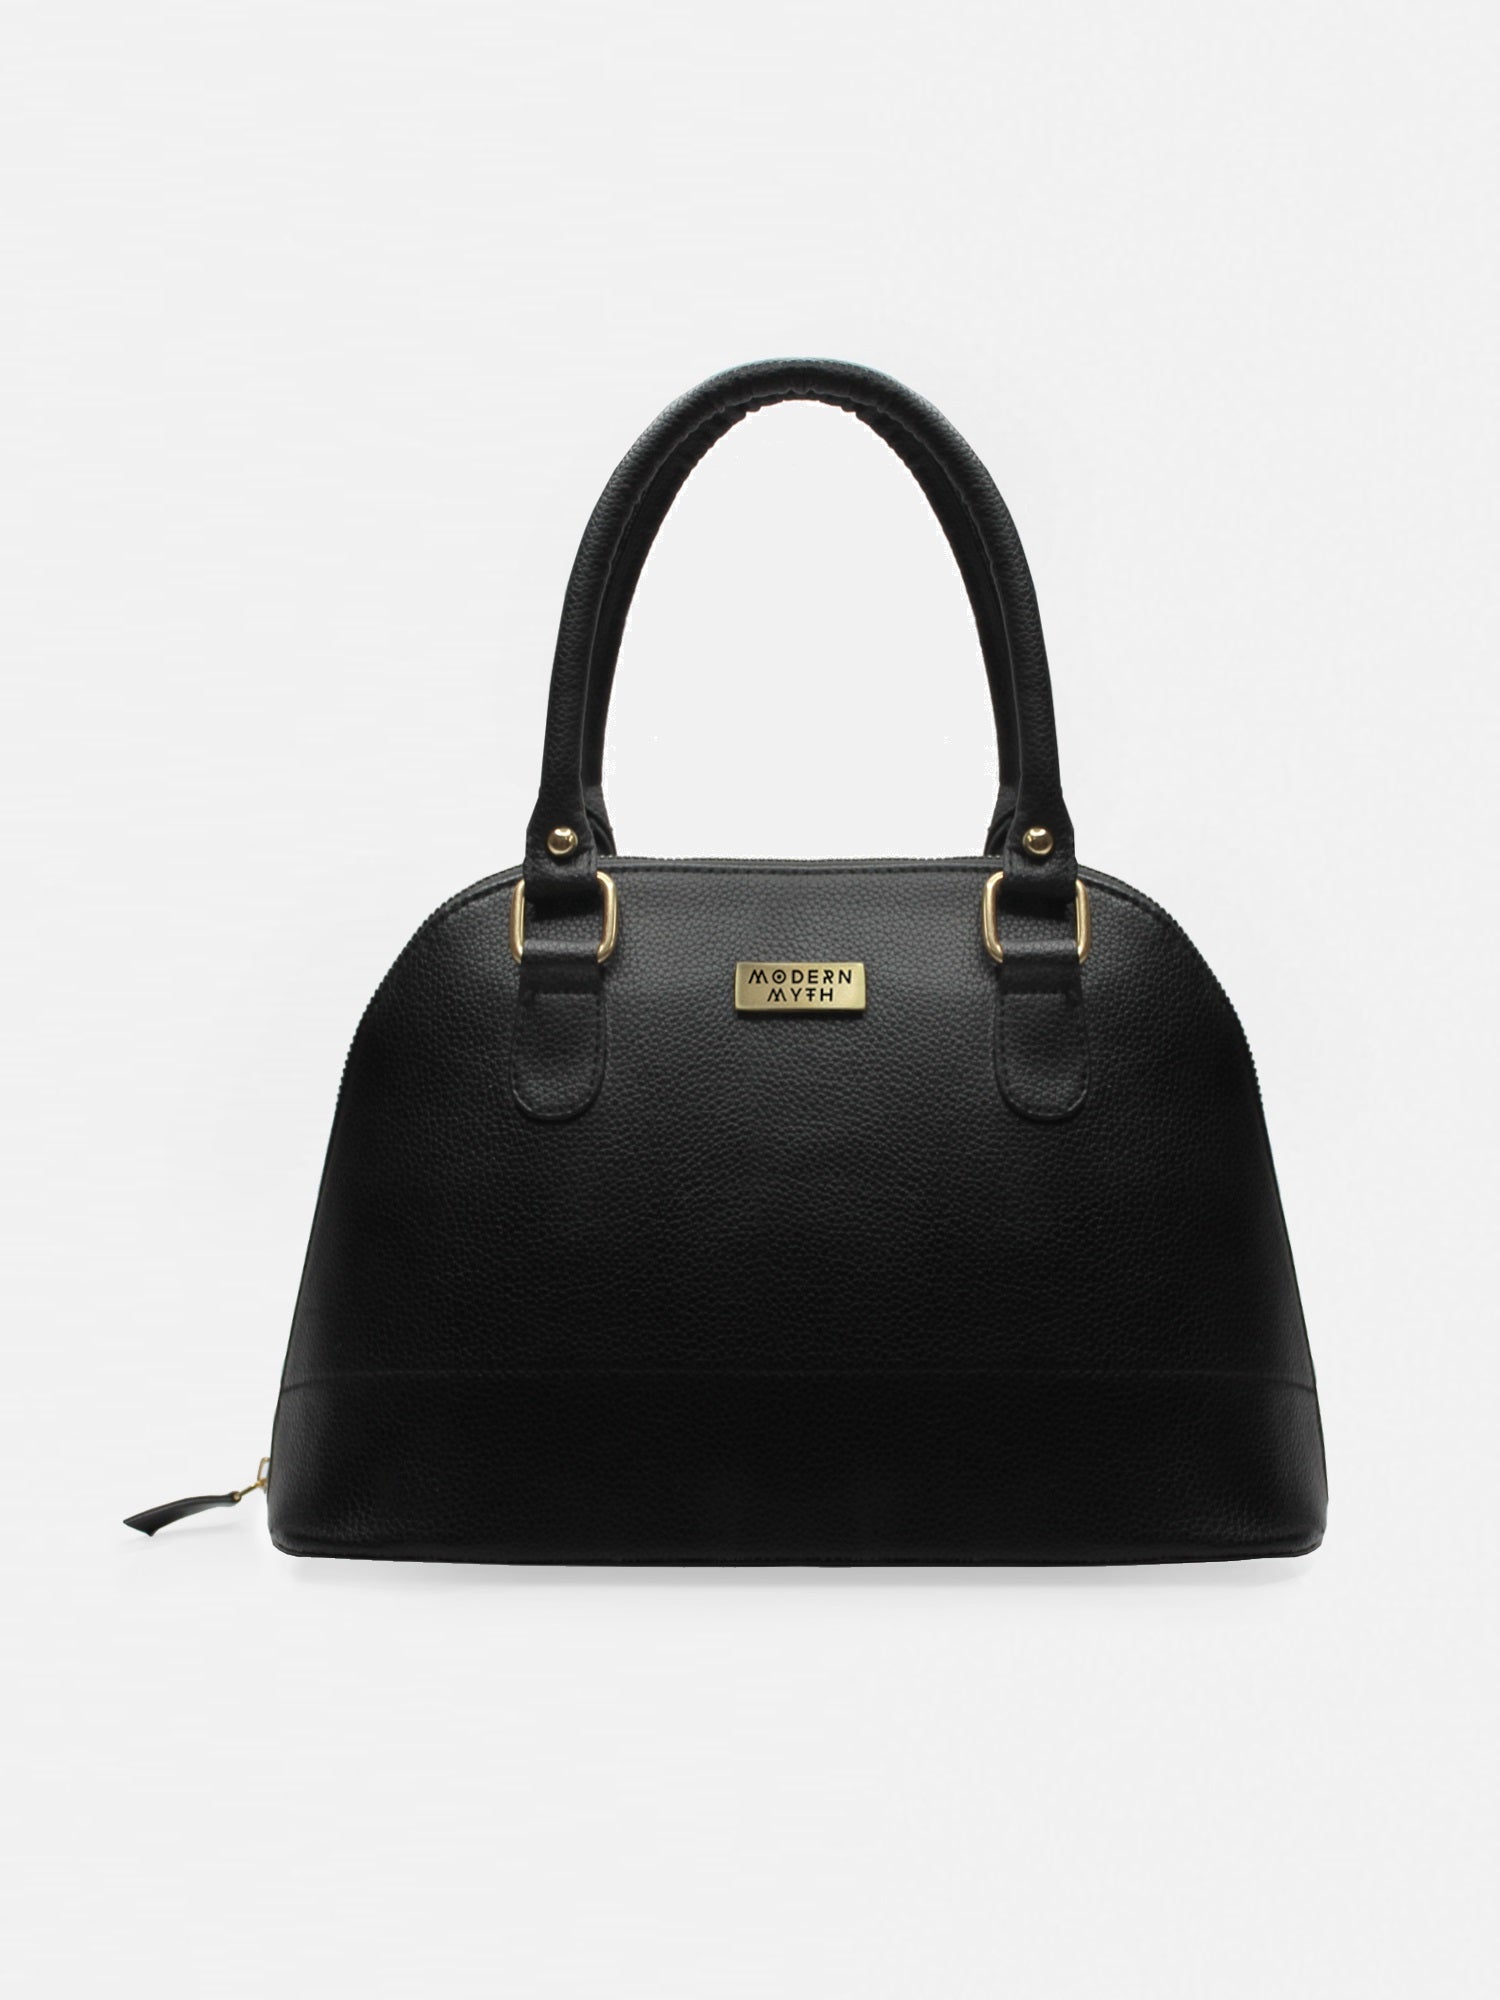 Buy Shelta Brown Leather Bag Online-Duffle Bags in USA - Sixtease Bags